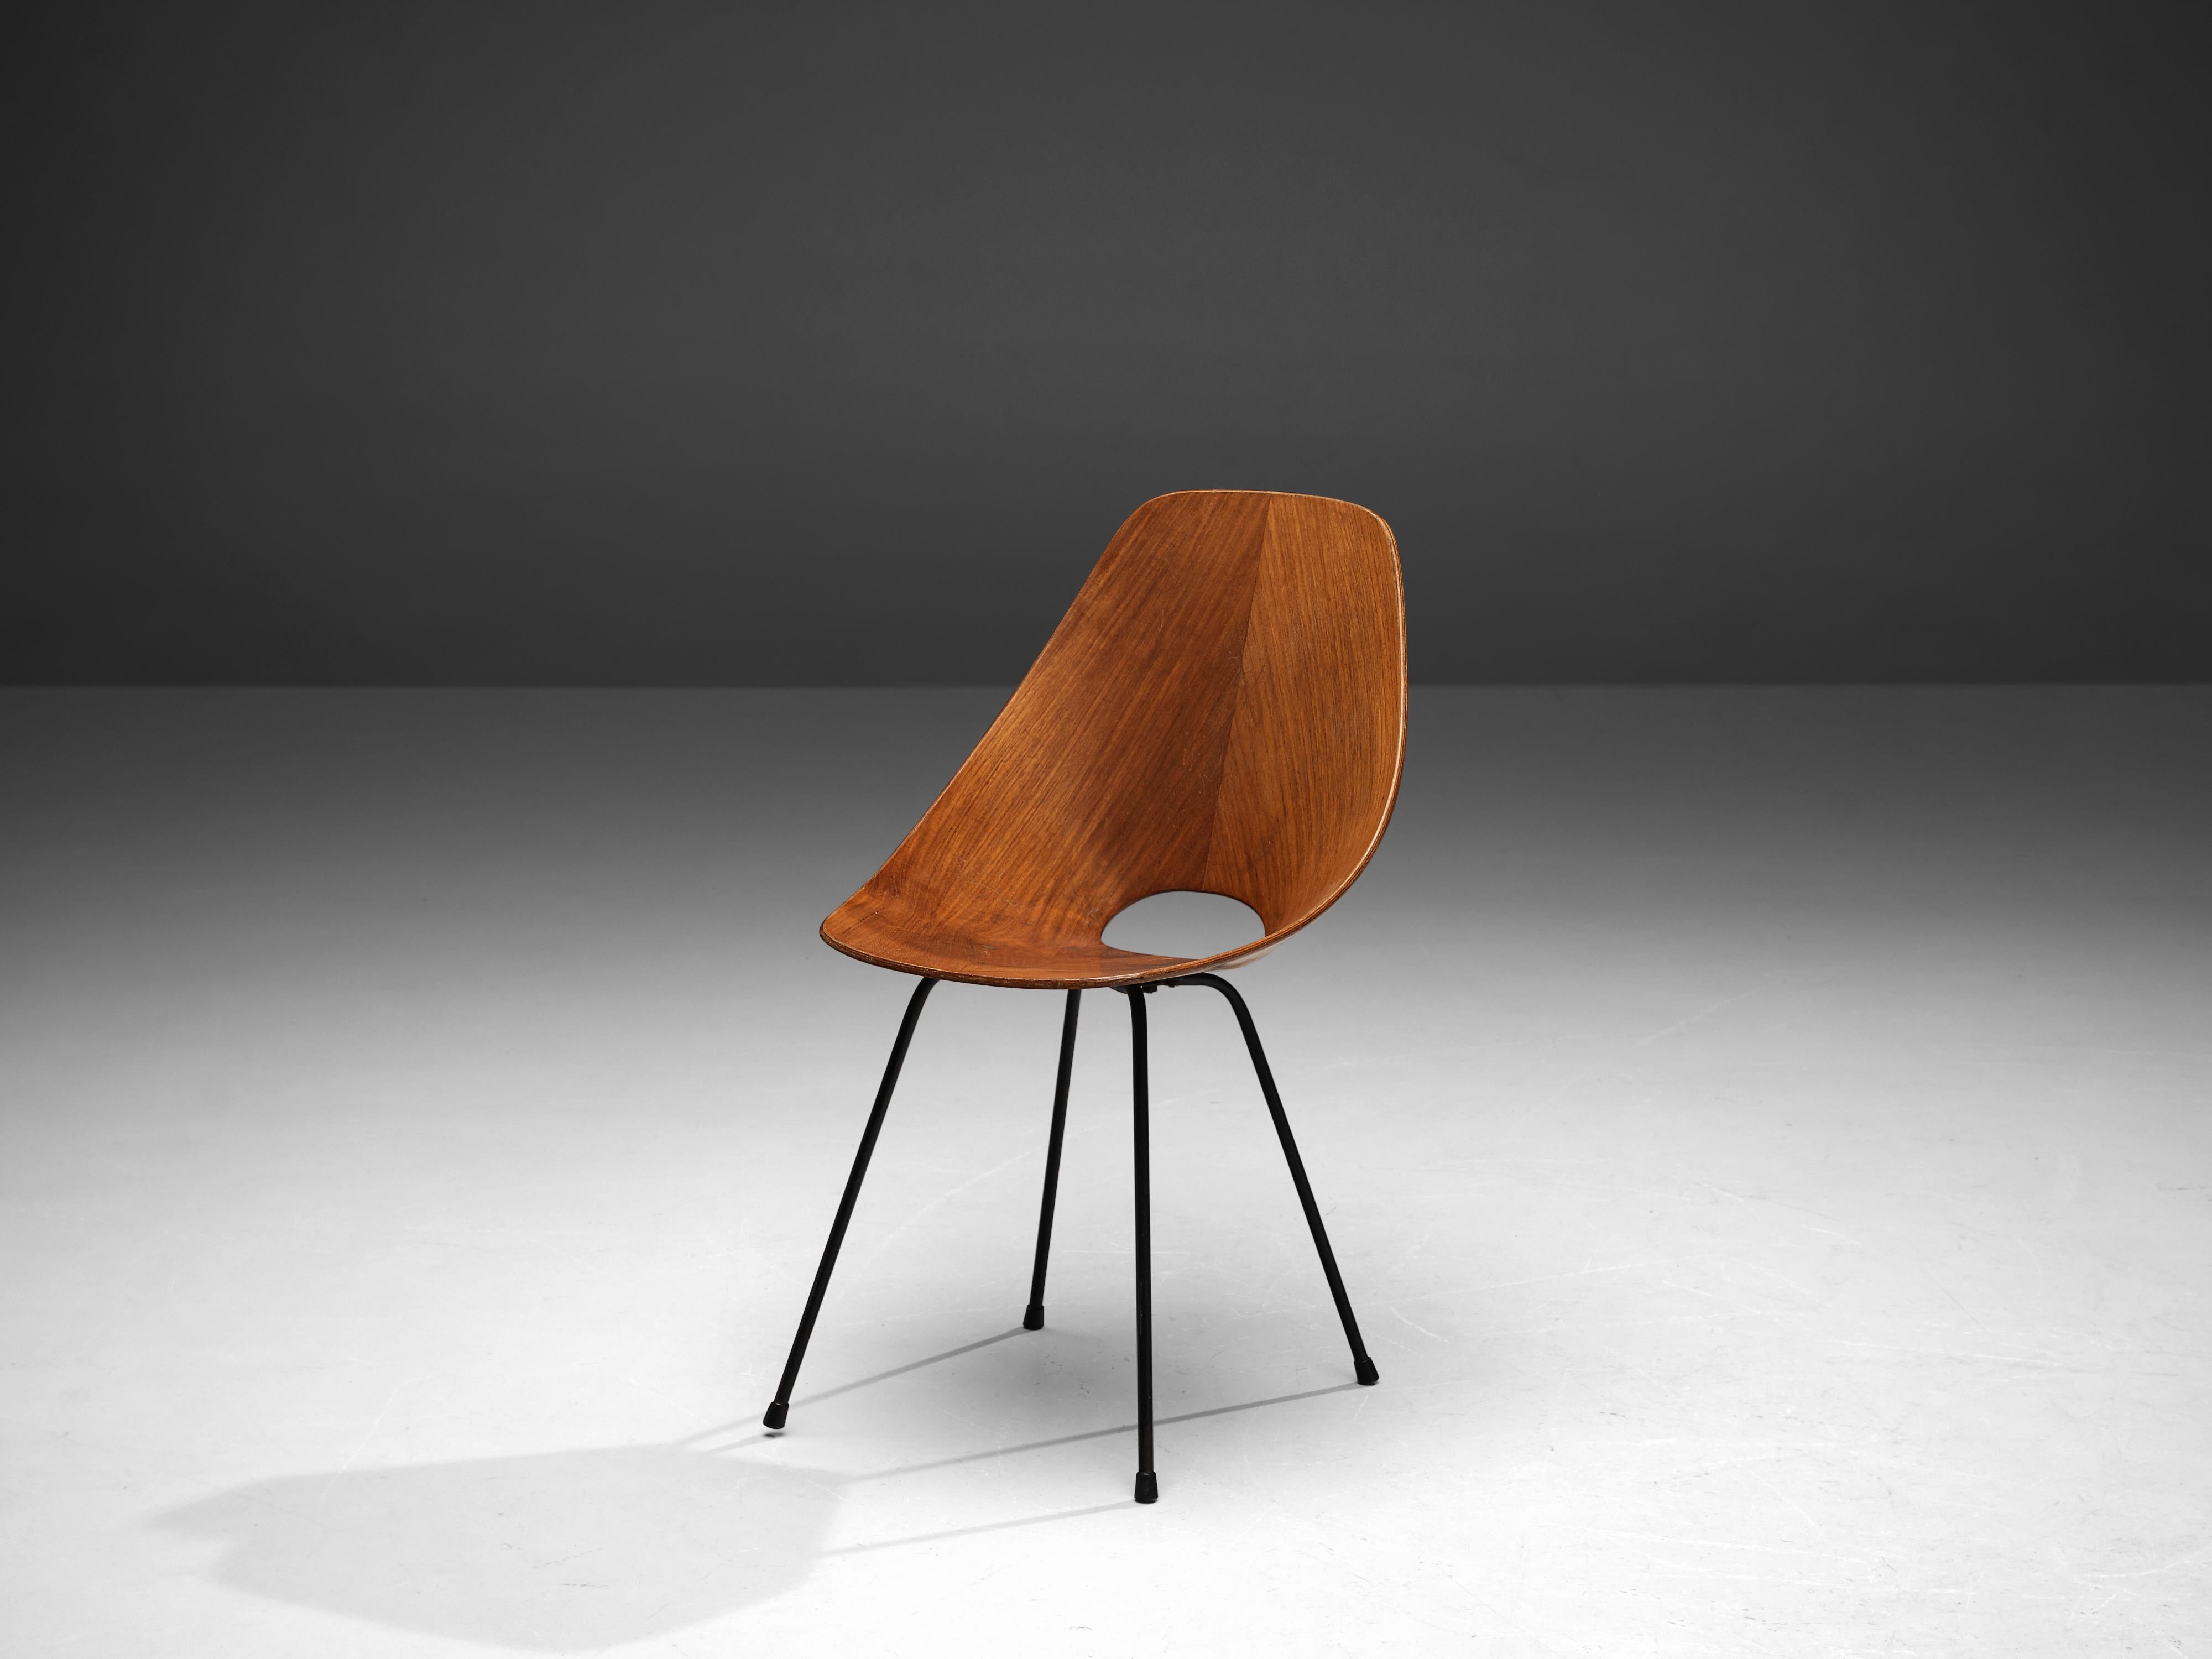 Vittorio Nobili for Tagliabue, dining chair 'Medea', teak and mahogany, Italy, 1955. 

This 'Medea' chair is designed by the Italian designer Vittorio Nobili. The plywood chair is veneered in carefully chosen mahogany, which gives it a warm